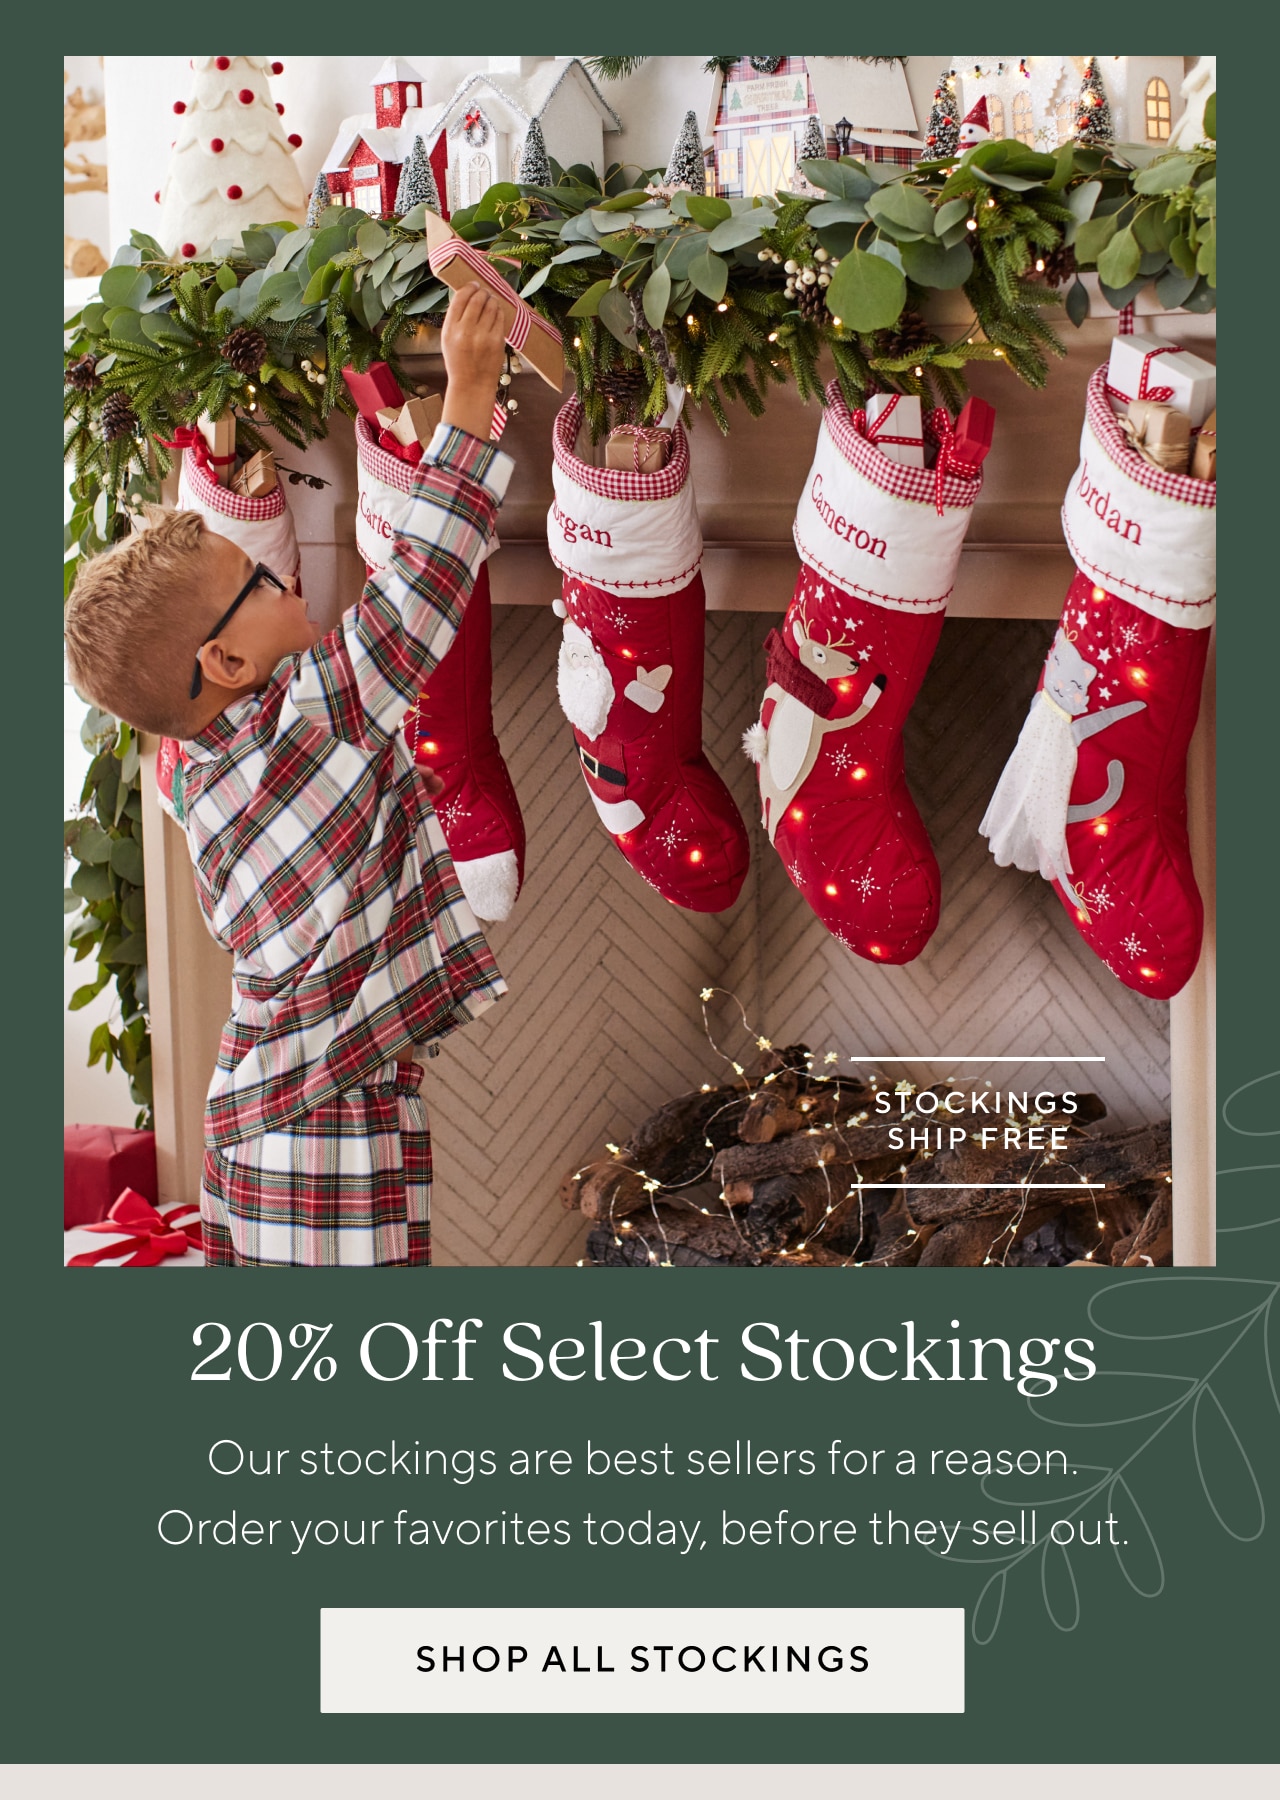 20% OFF SELECT STOCKINGS